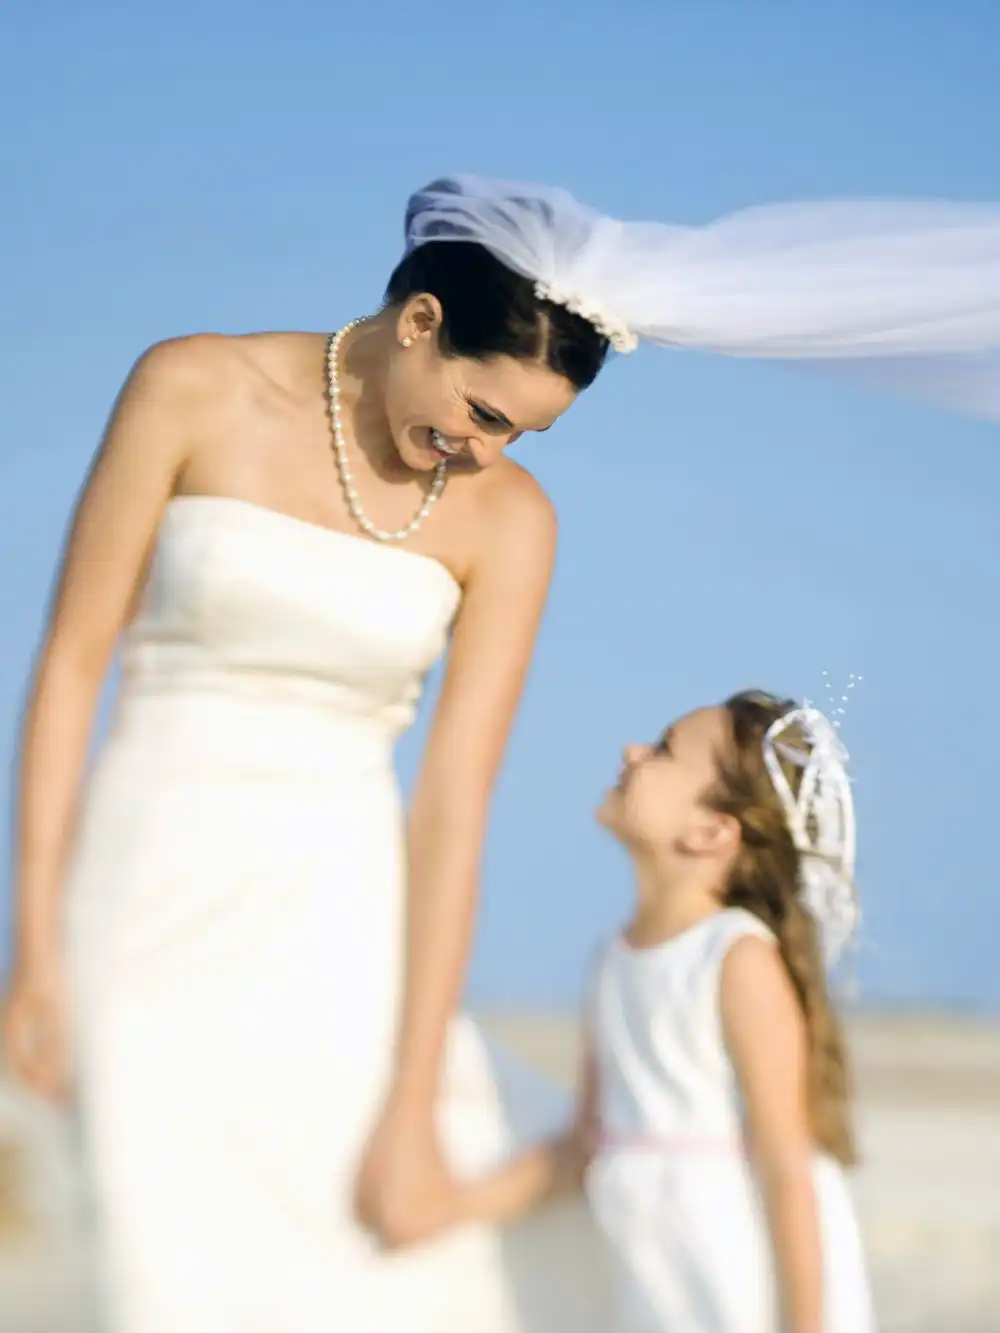 Flower girl and bride wearing a white dress